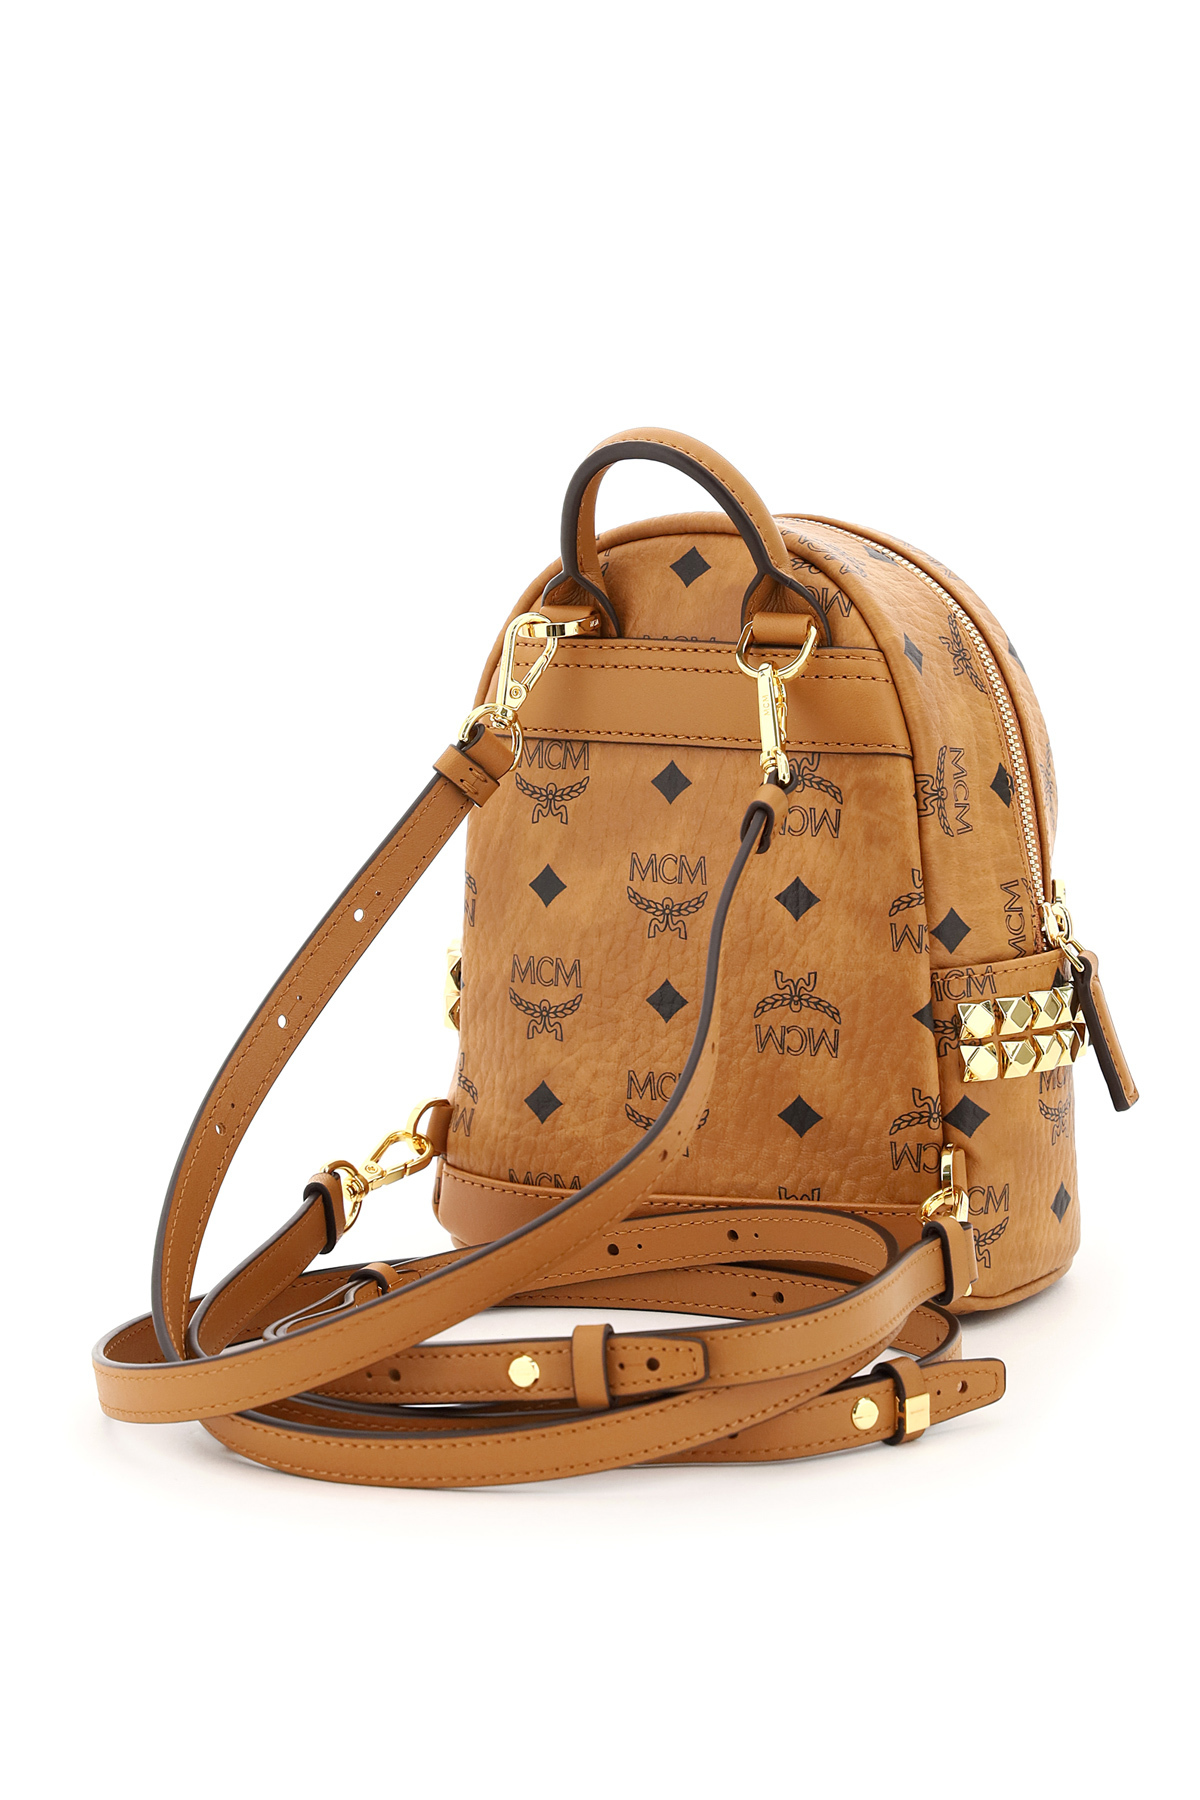 Image 2 of MCM LADIES BACKPACK MCM レディース バックパック MMKAAVE13 CO